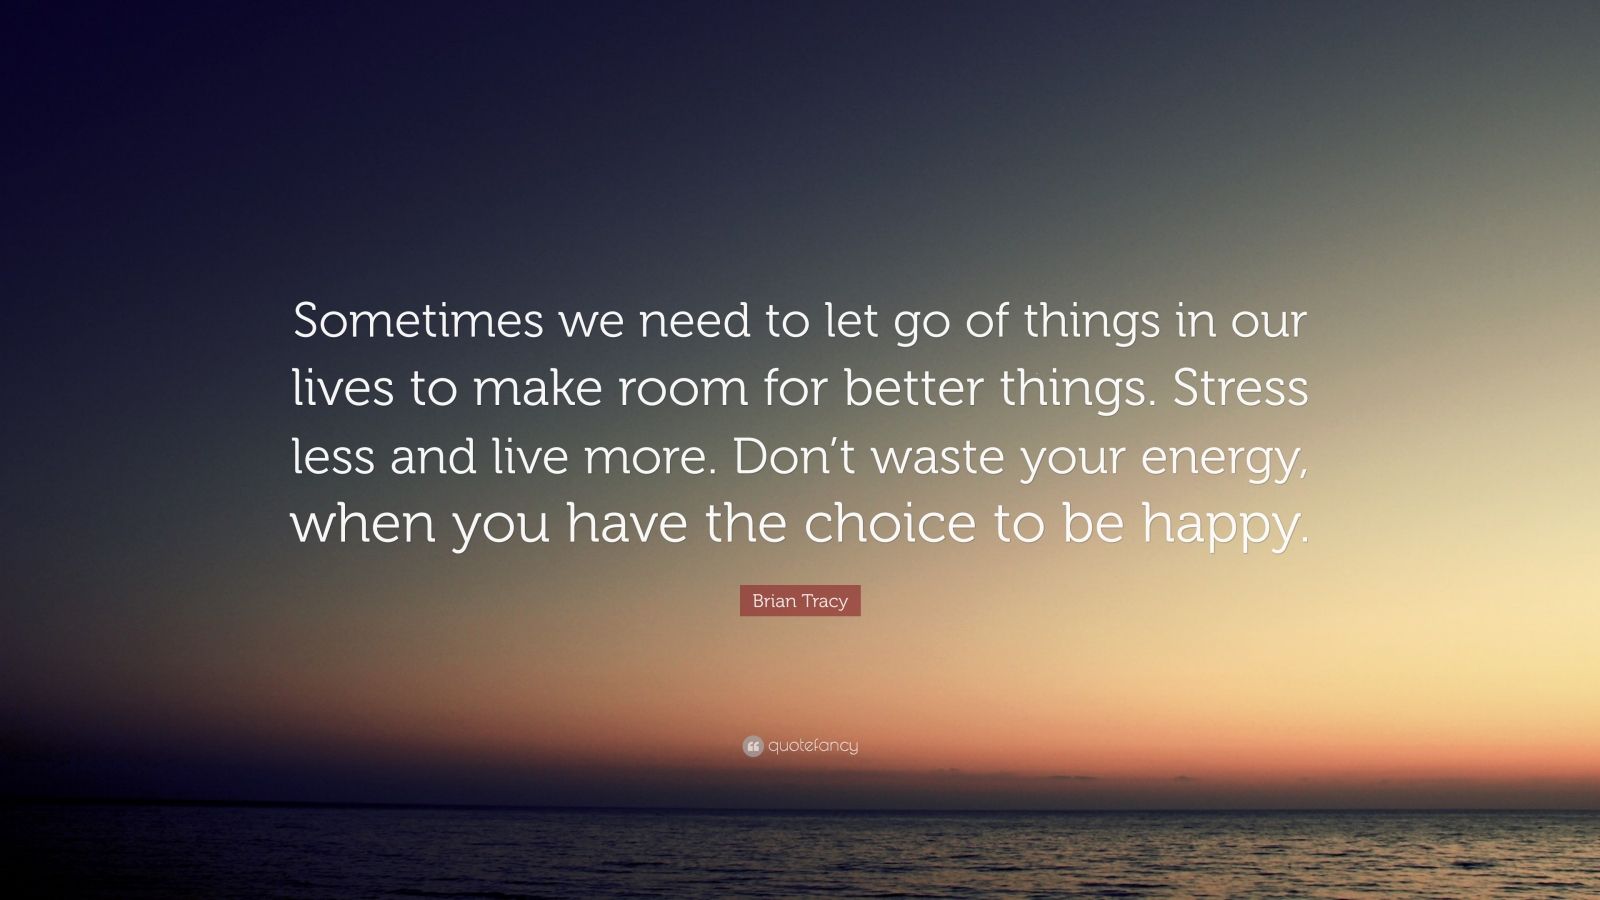 Brian Tracy Quote: “Sometimes we need to let go of things in our lives ...